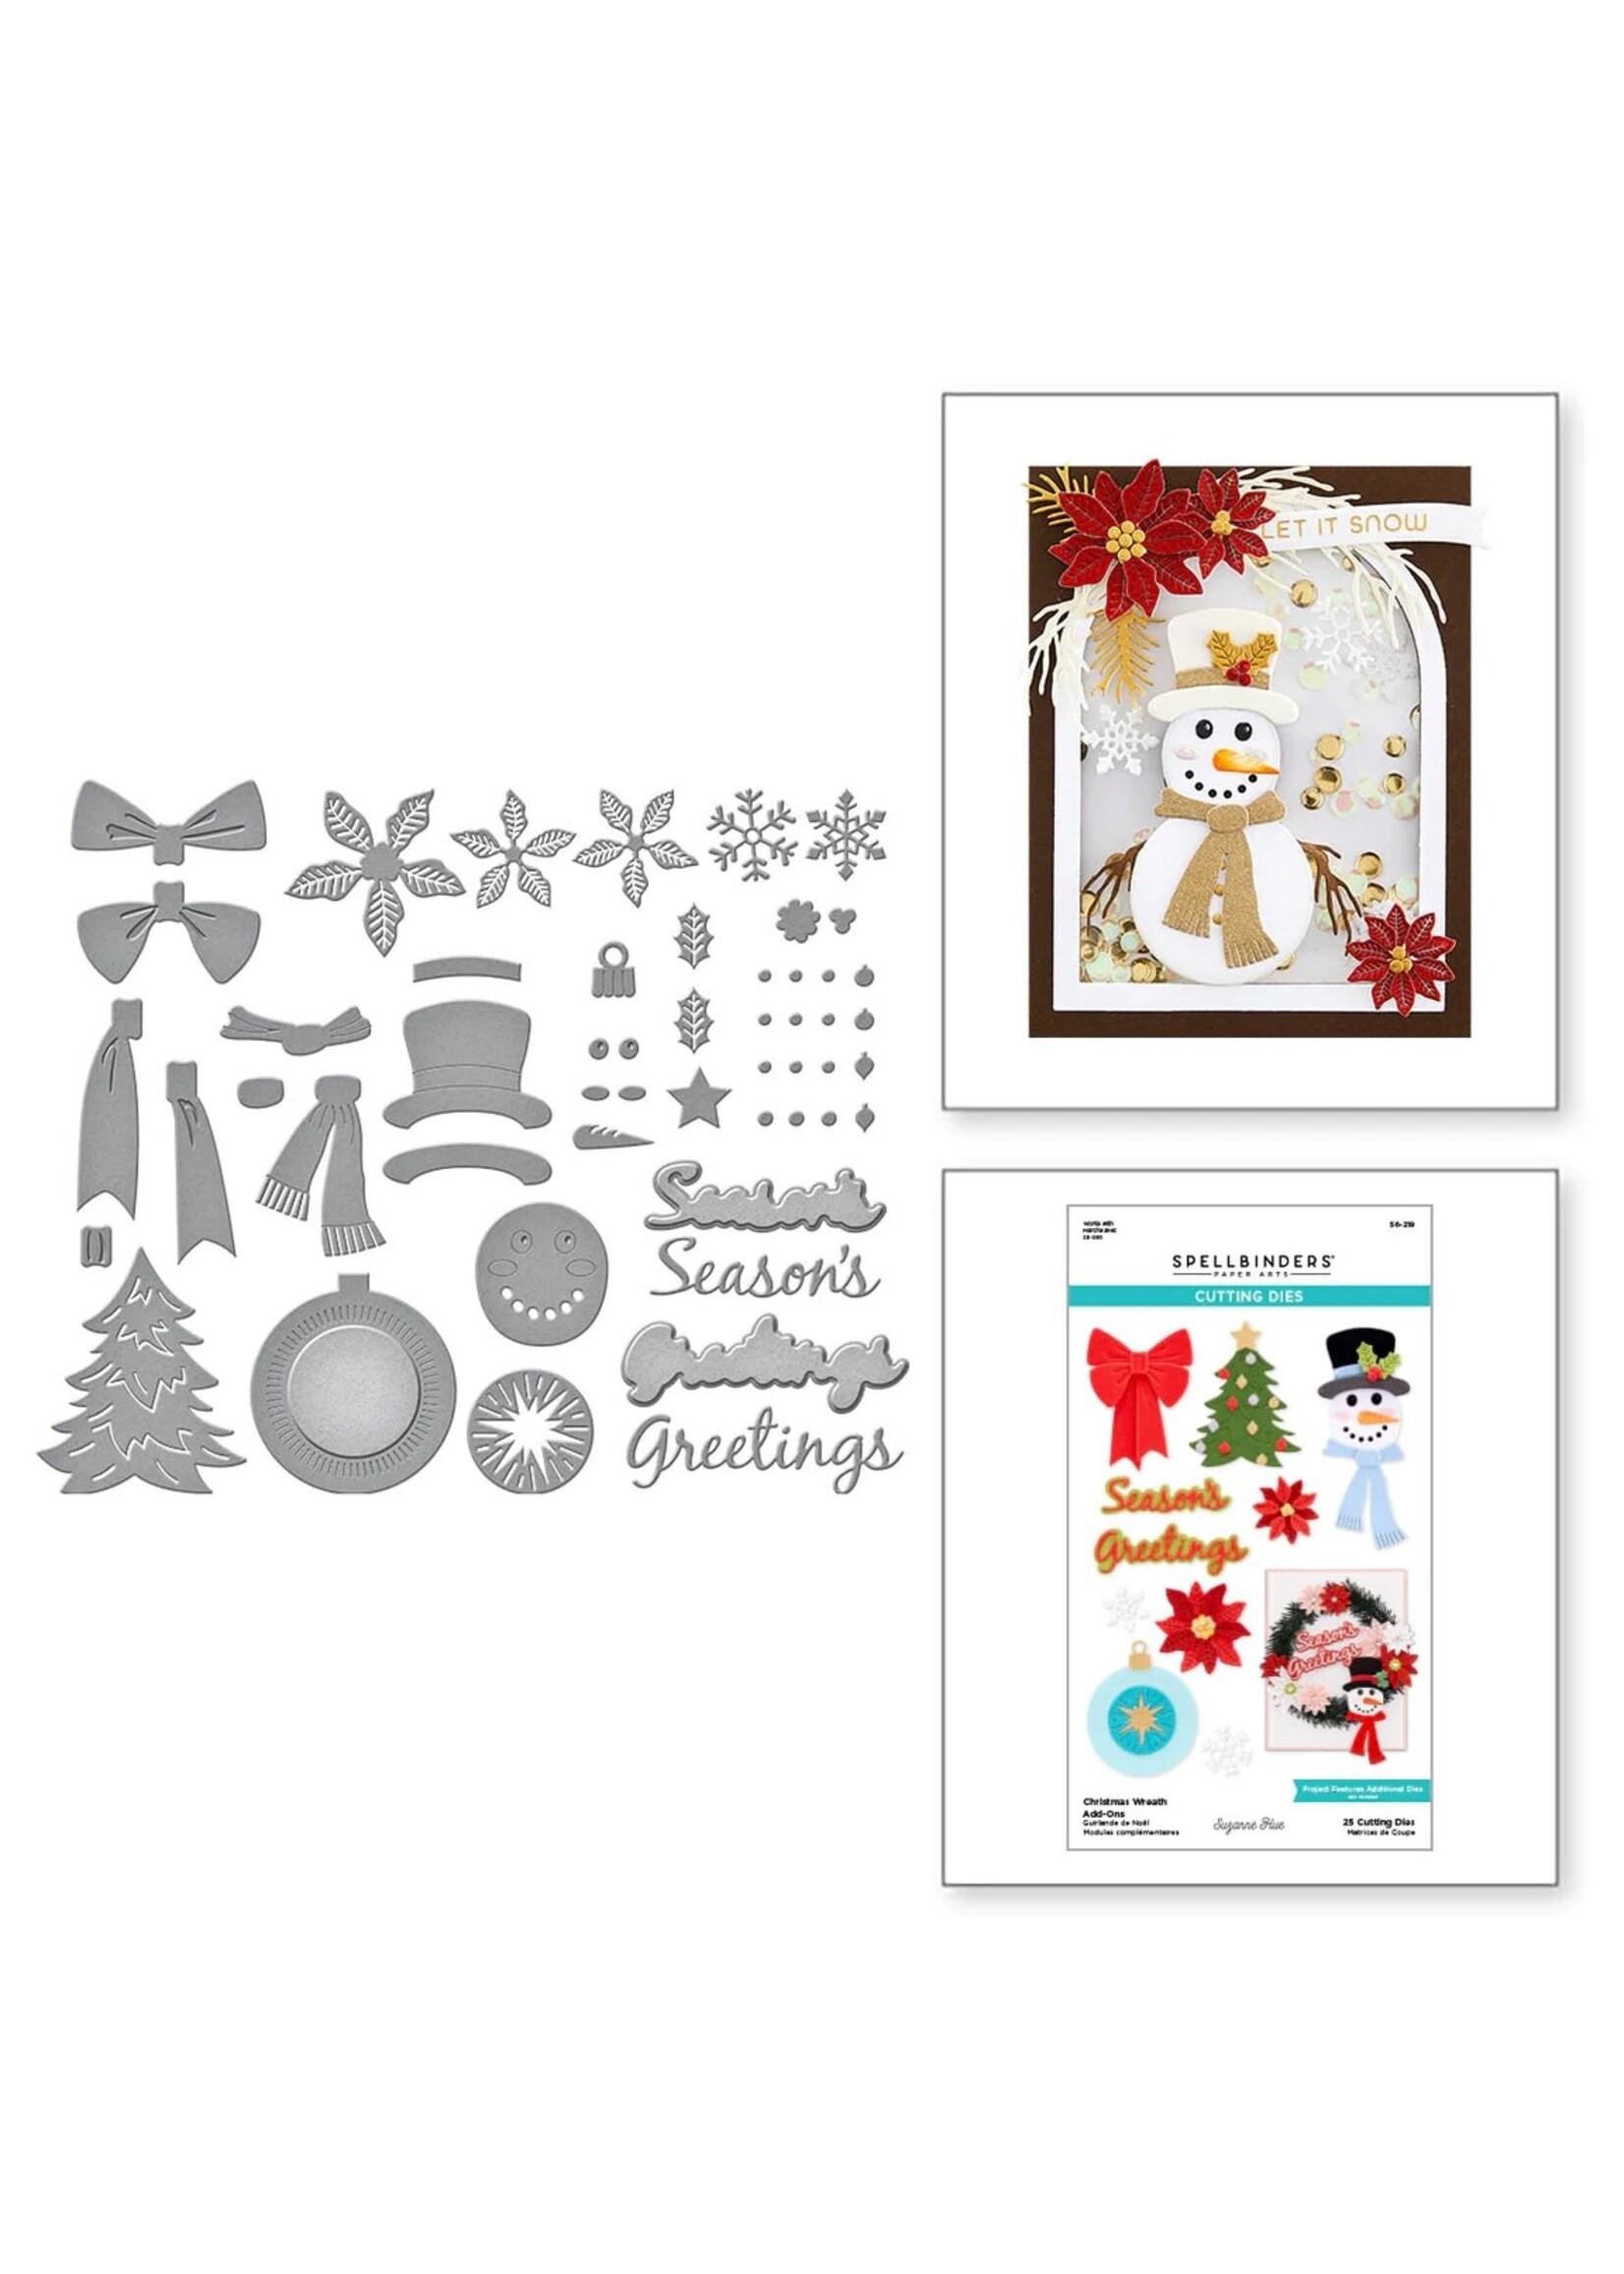 Suzanne Hue Christmas Wreath Add-Ons Etched Dies from the Beautiful Wreaths Collection by Suzanne Hue